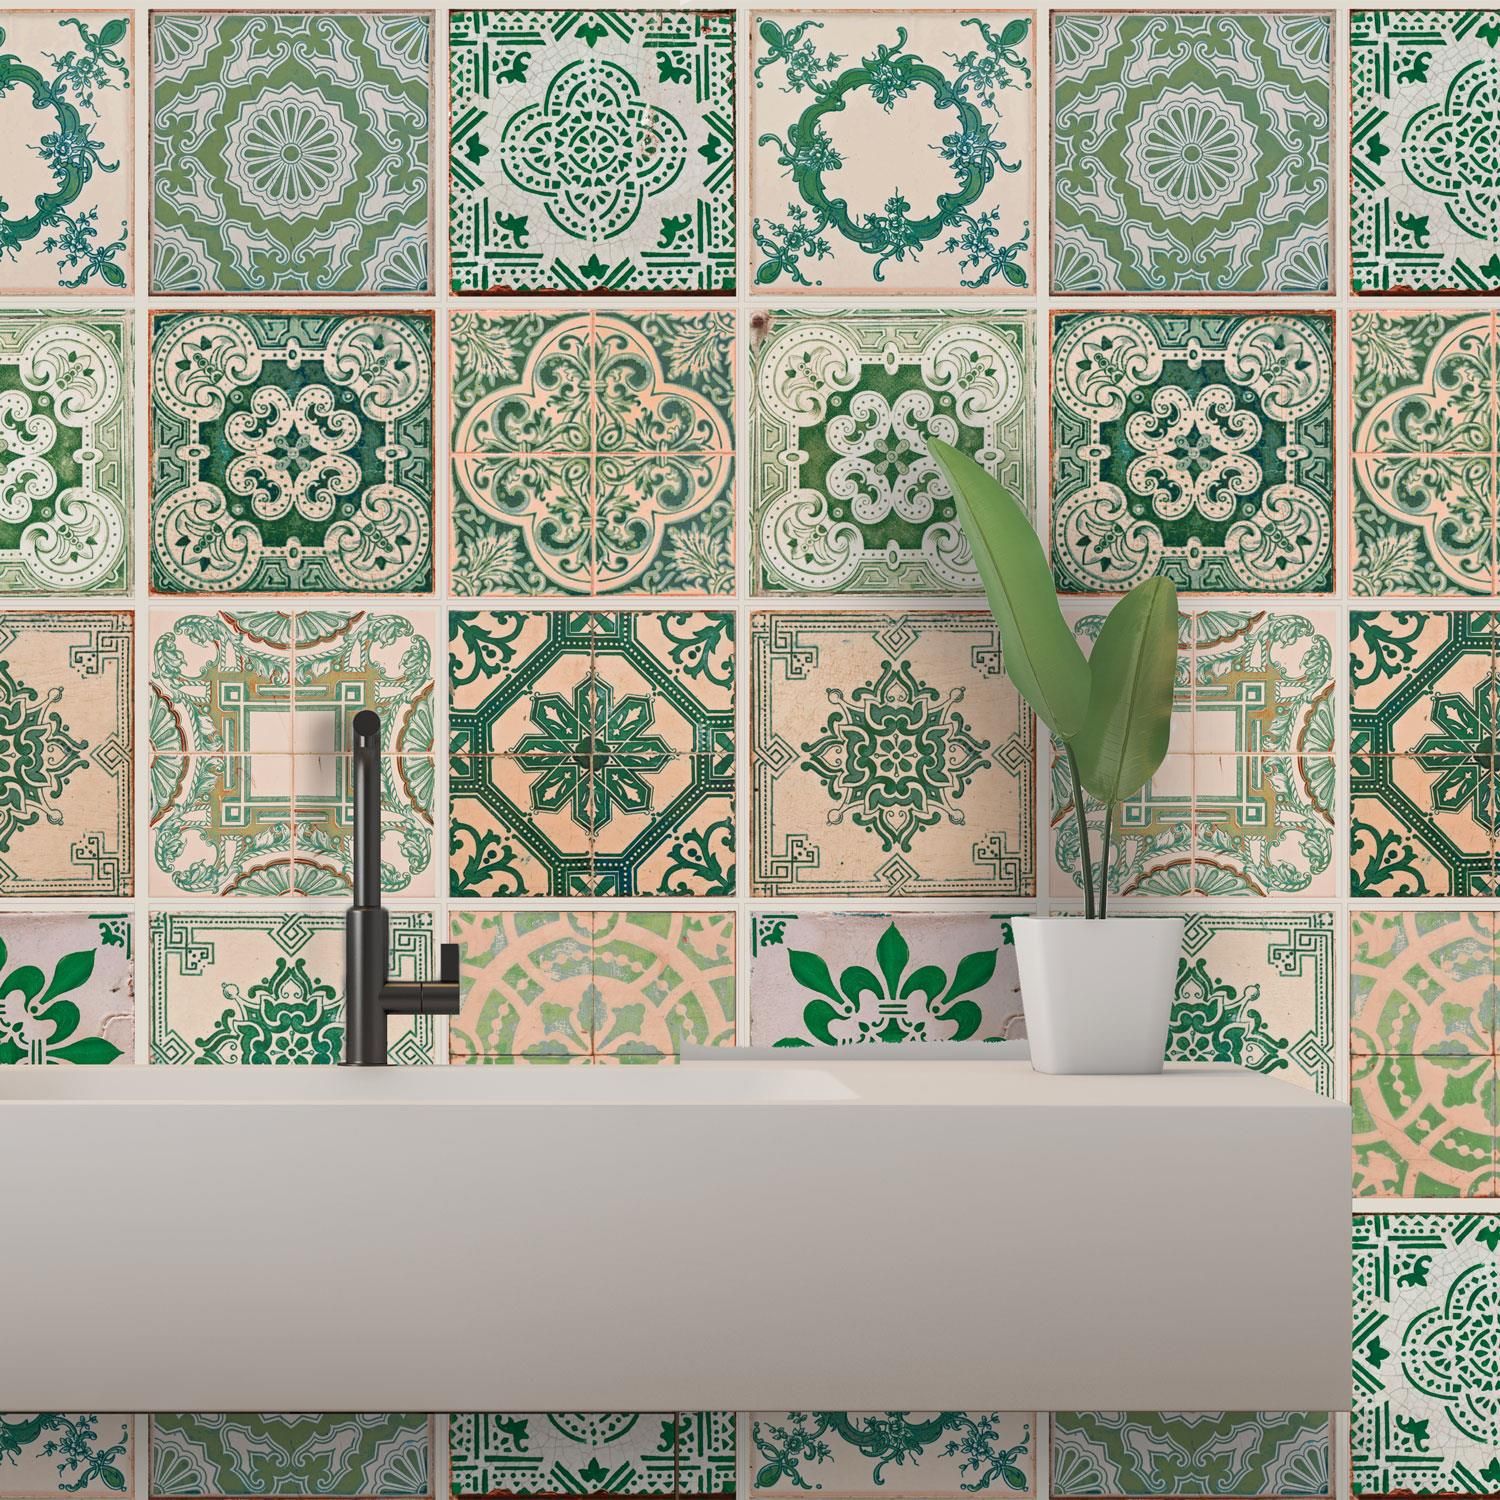 - Green pattern of azulejo was inspired by the vintage Spain tile art. The graceful combination of green and grey pattern bring you to the old town of Spain, as if the Mediterranean sun was just by your side.
- To apply, just peel and stick onto any clean, flat surfaces like wall, furniture or as window screen, and you are good to go! Easy to install and to remove without leaving a trace.
- Can be easily trimmed / cut to fit.
- Package Contains: 24 pieces of stickers 15 x 15 cm Coverage area: 0.54 square meters.